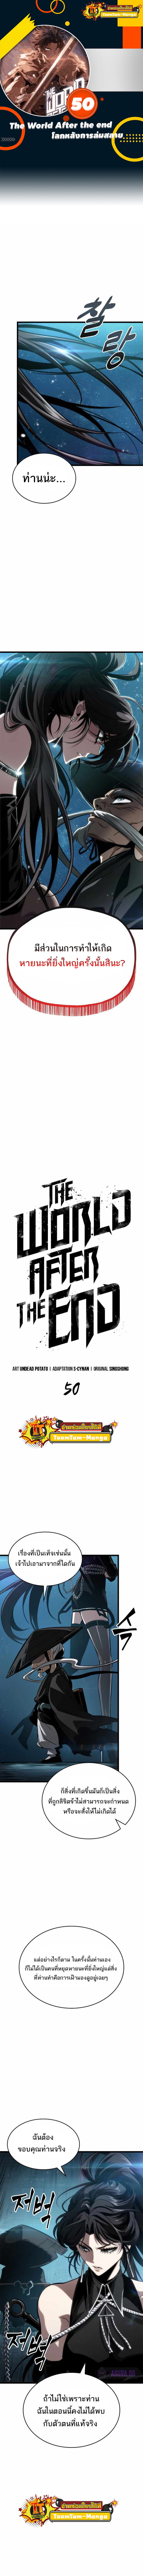 The World After the end 50 01